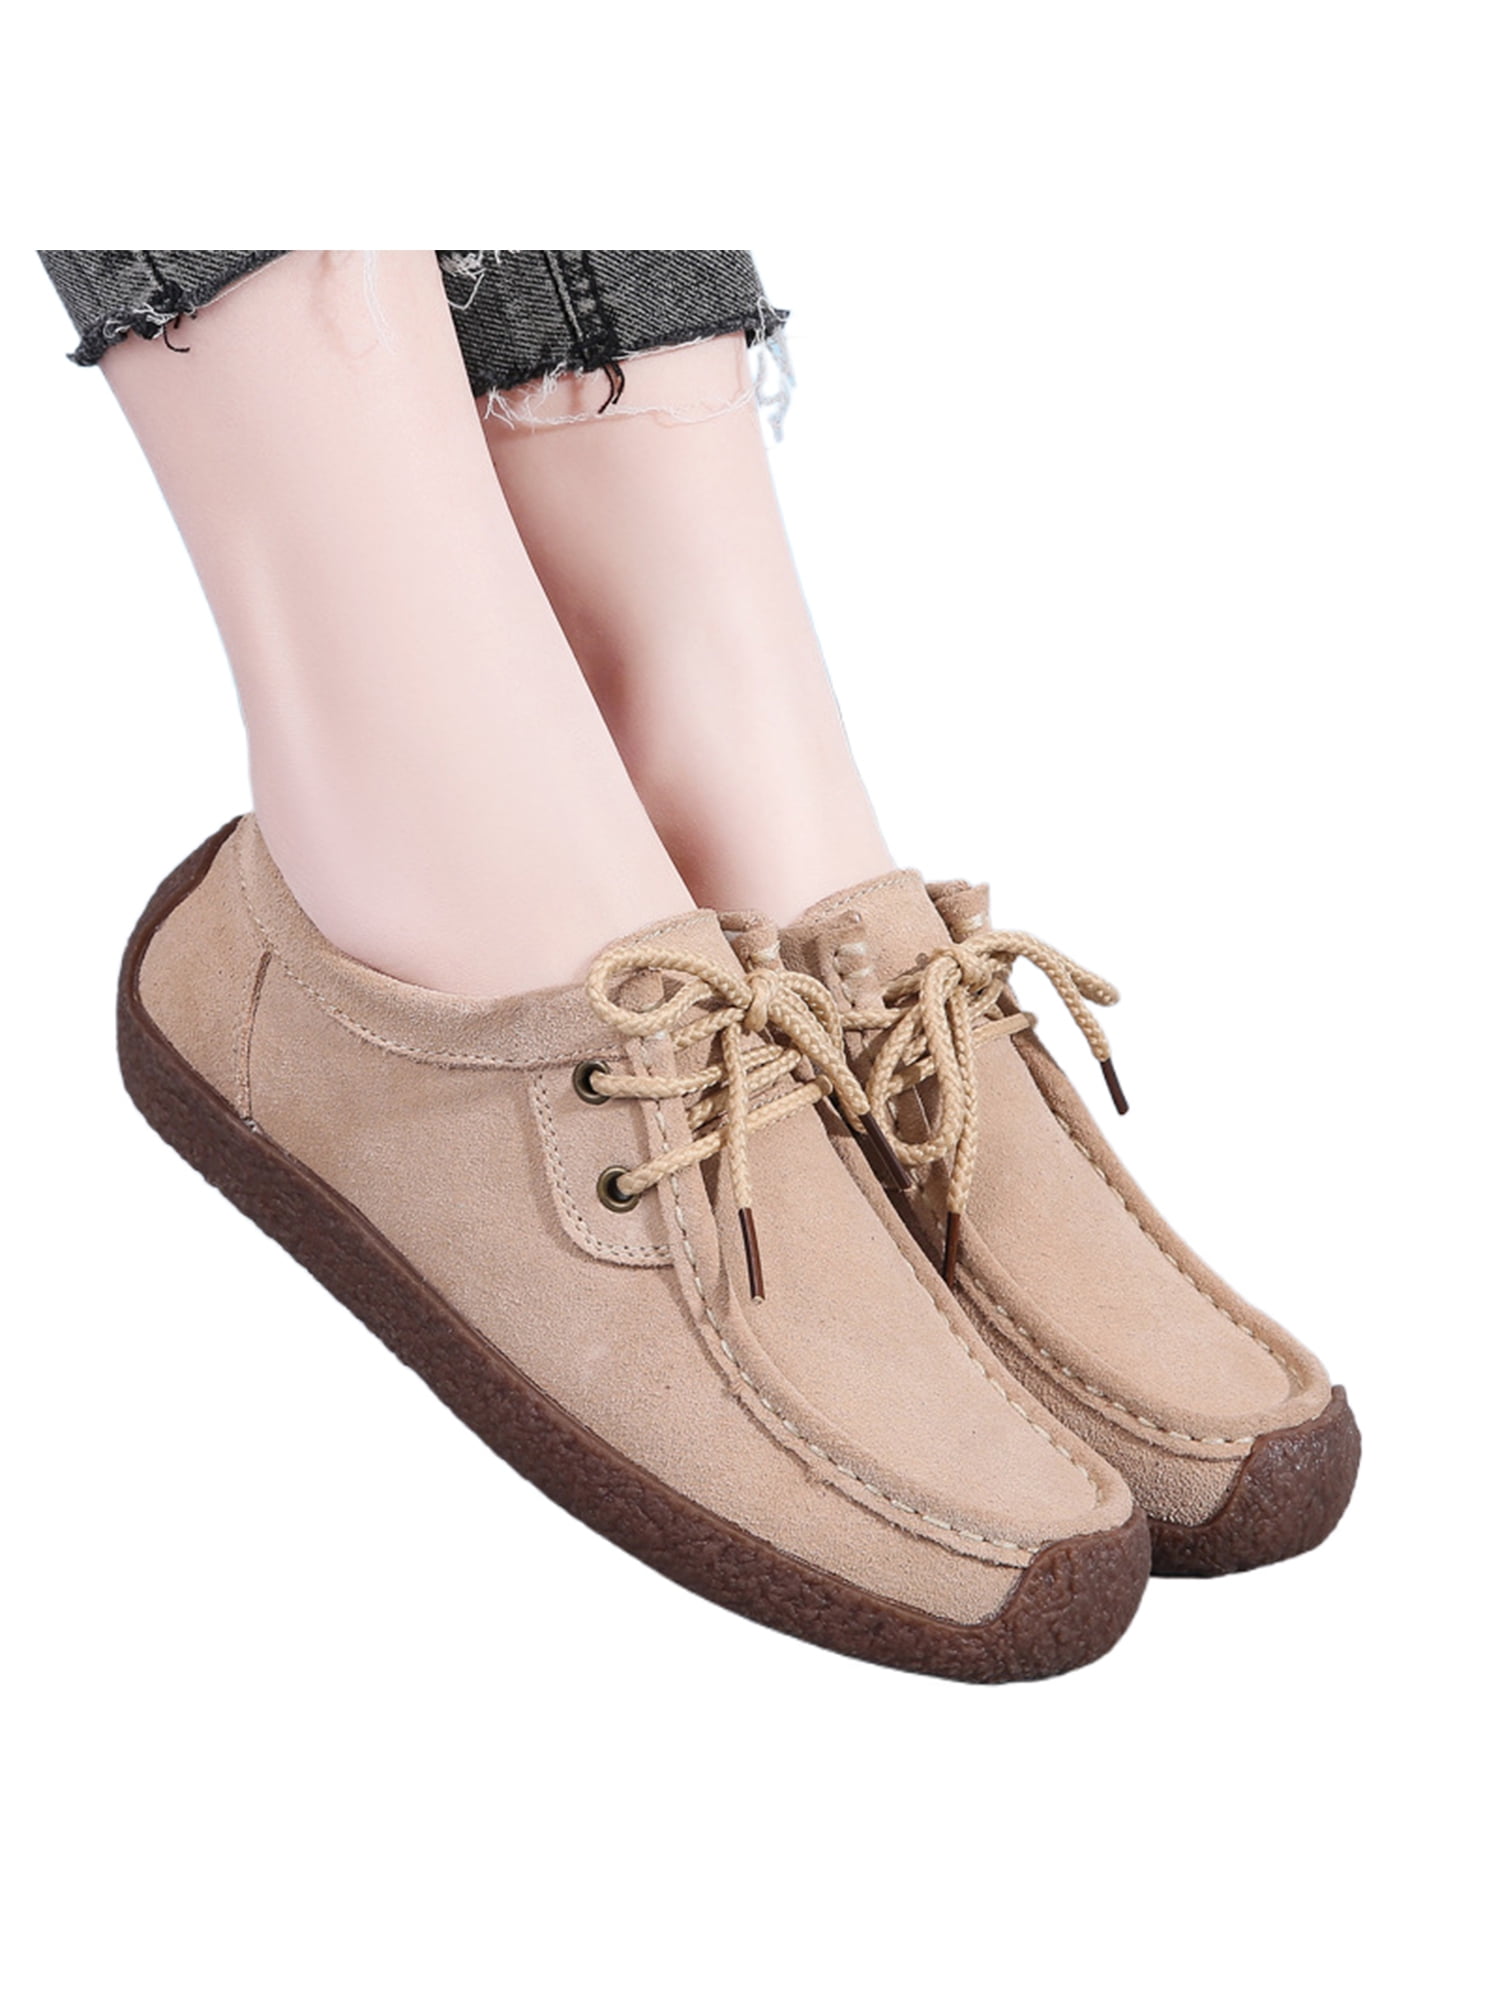 Moccasins  Buy Moccasins online for women at best prices in India   Flipkartcom